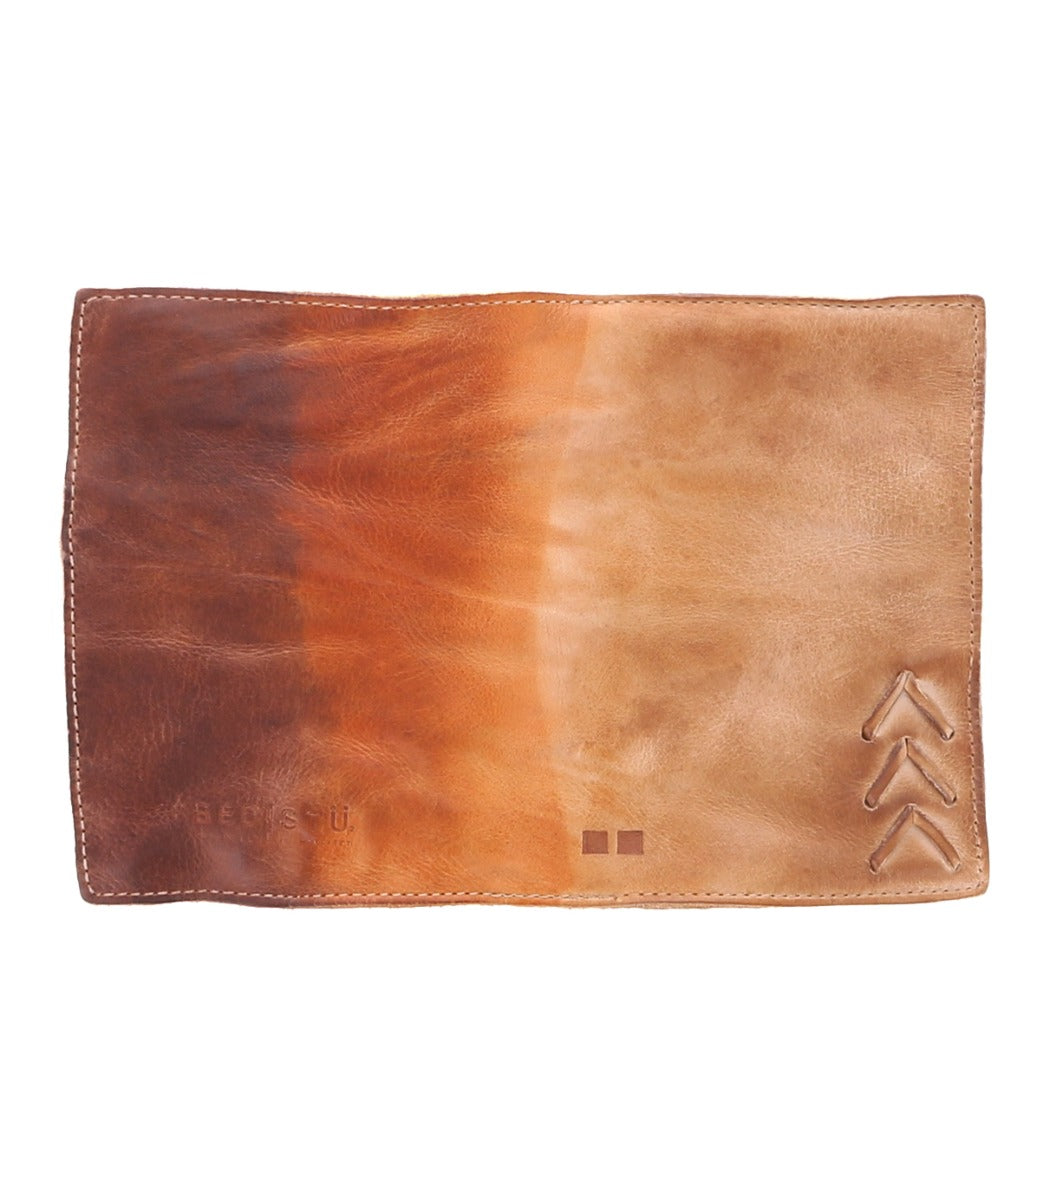 A brown leather Stardust passport sleeve with an arrow on it. (Brand: Bed Stu)